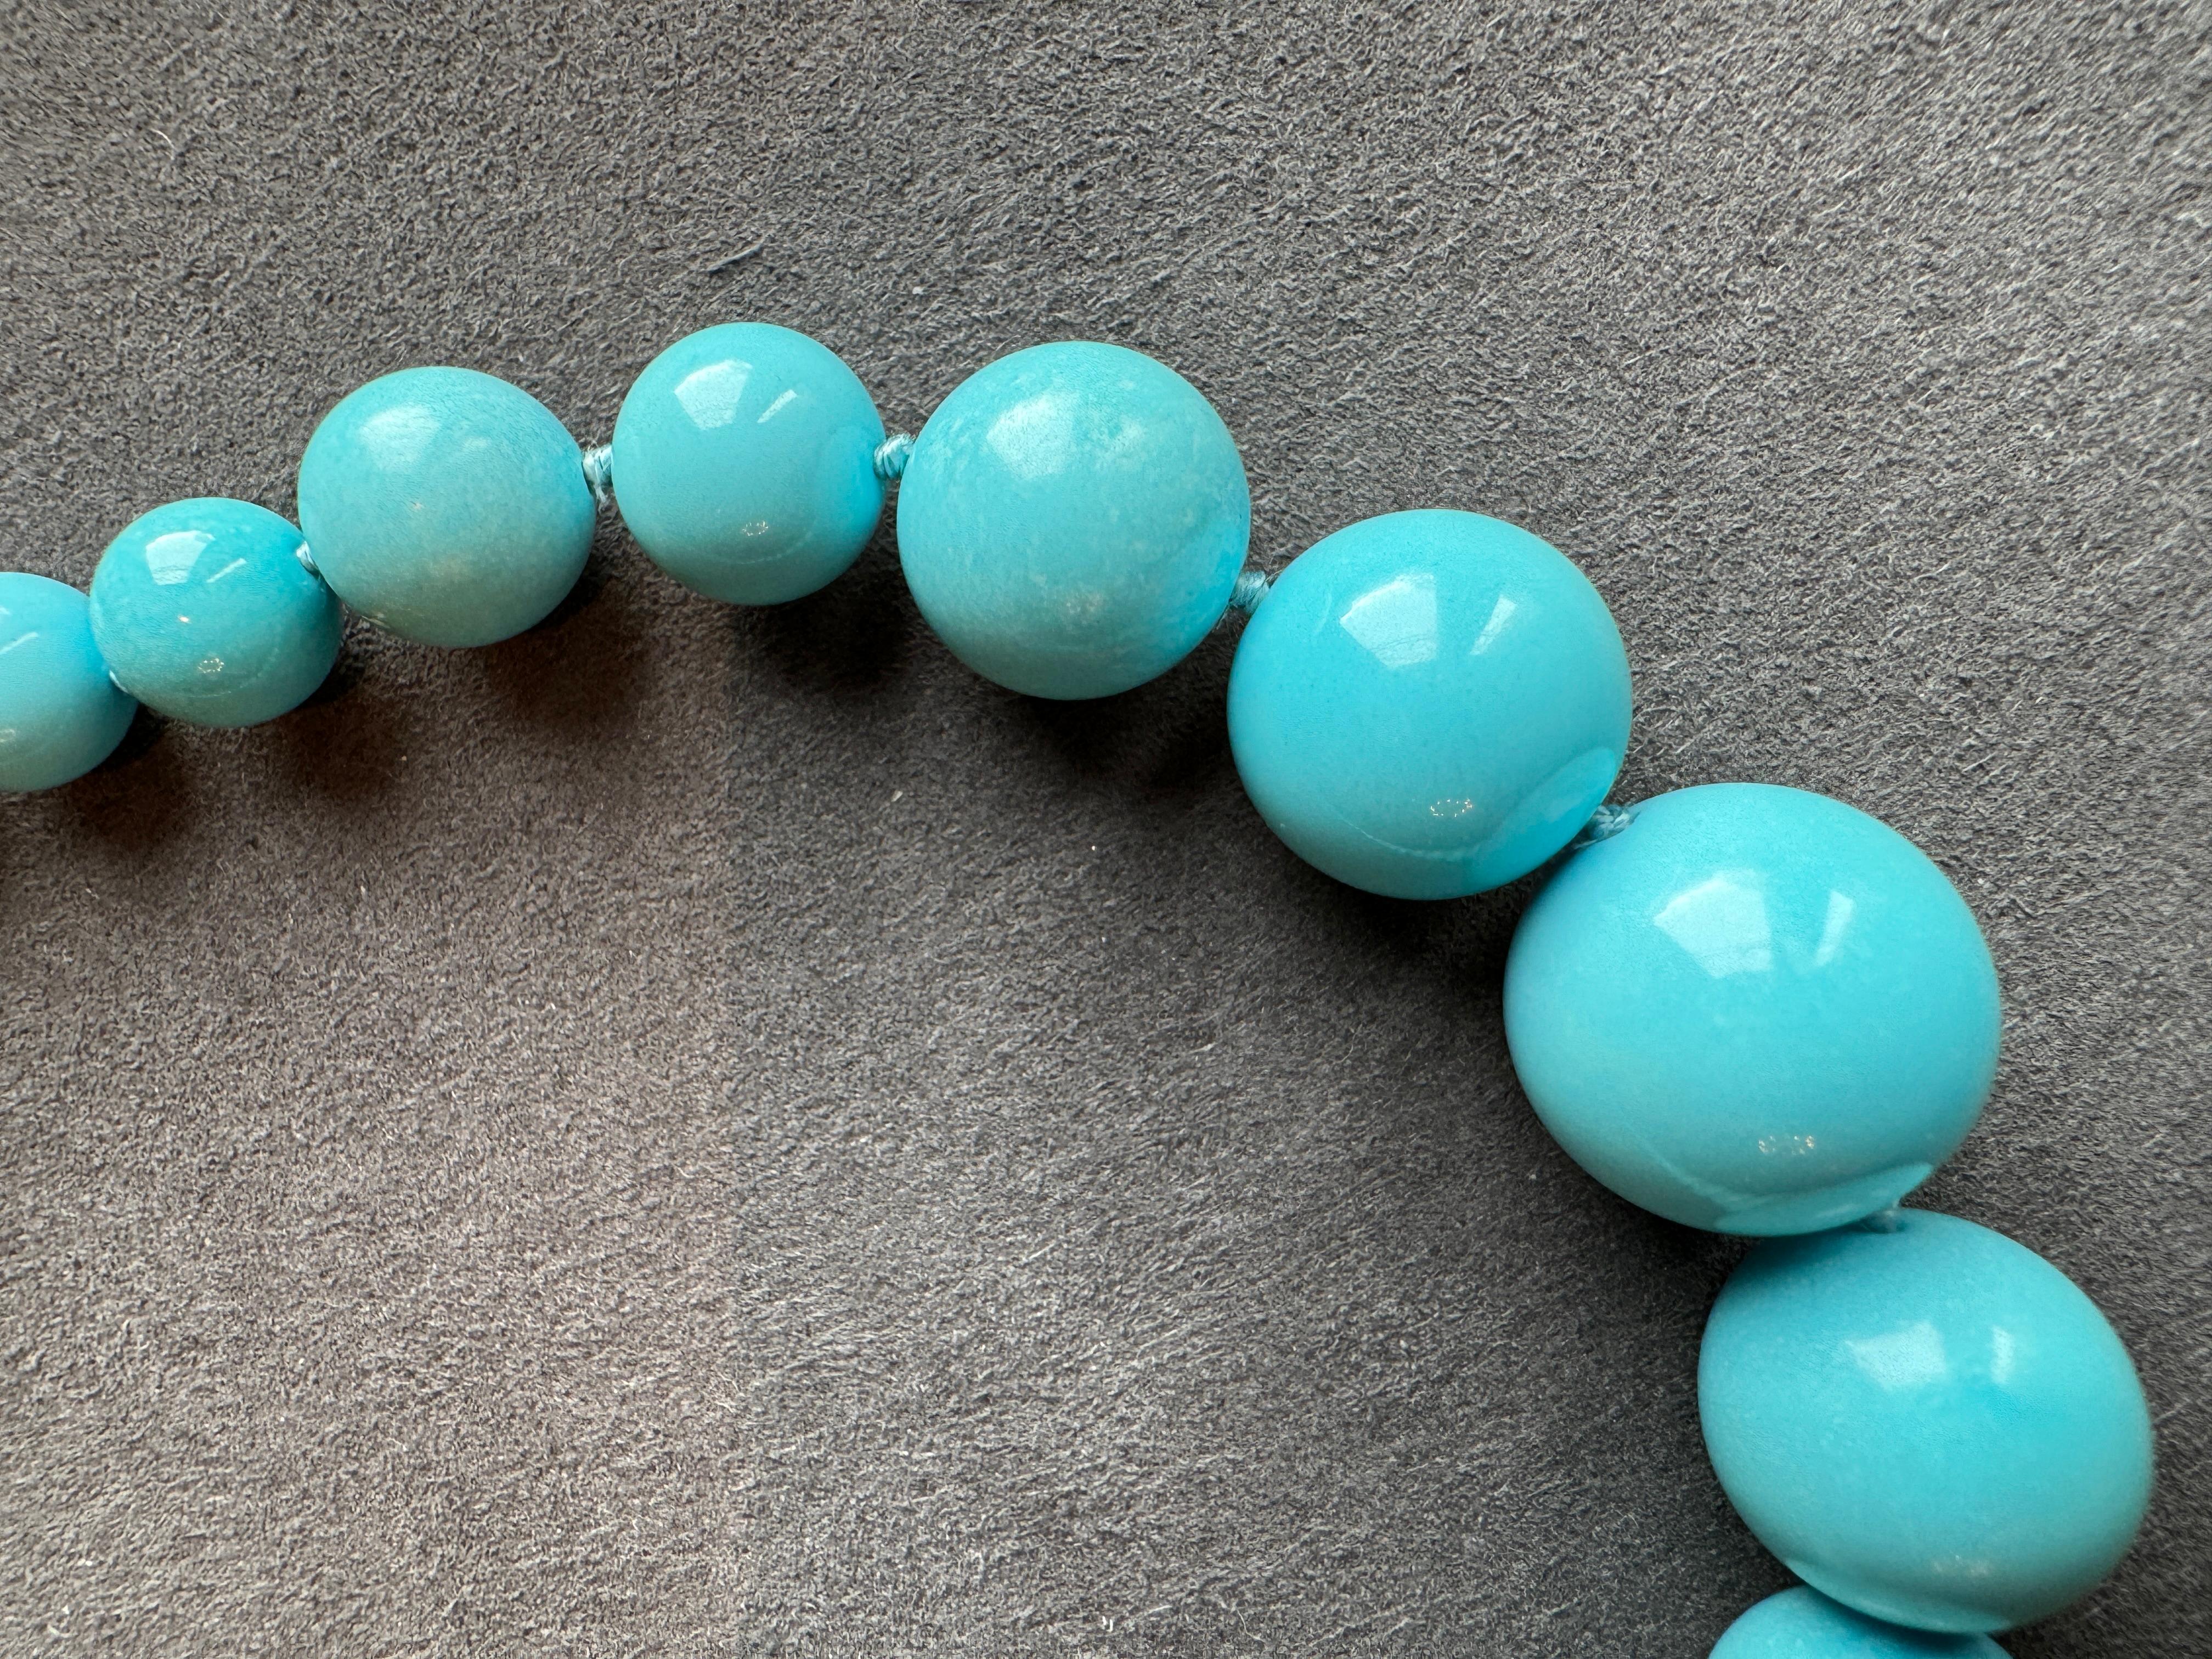 Graduated Single Strand of 56 Natural Turquoise Round Beads with 18k white gold clasp with certificate of guarantee as Sleeping Beauty